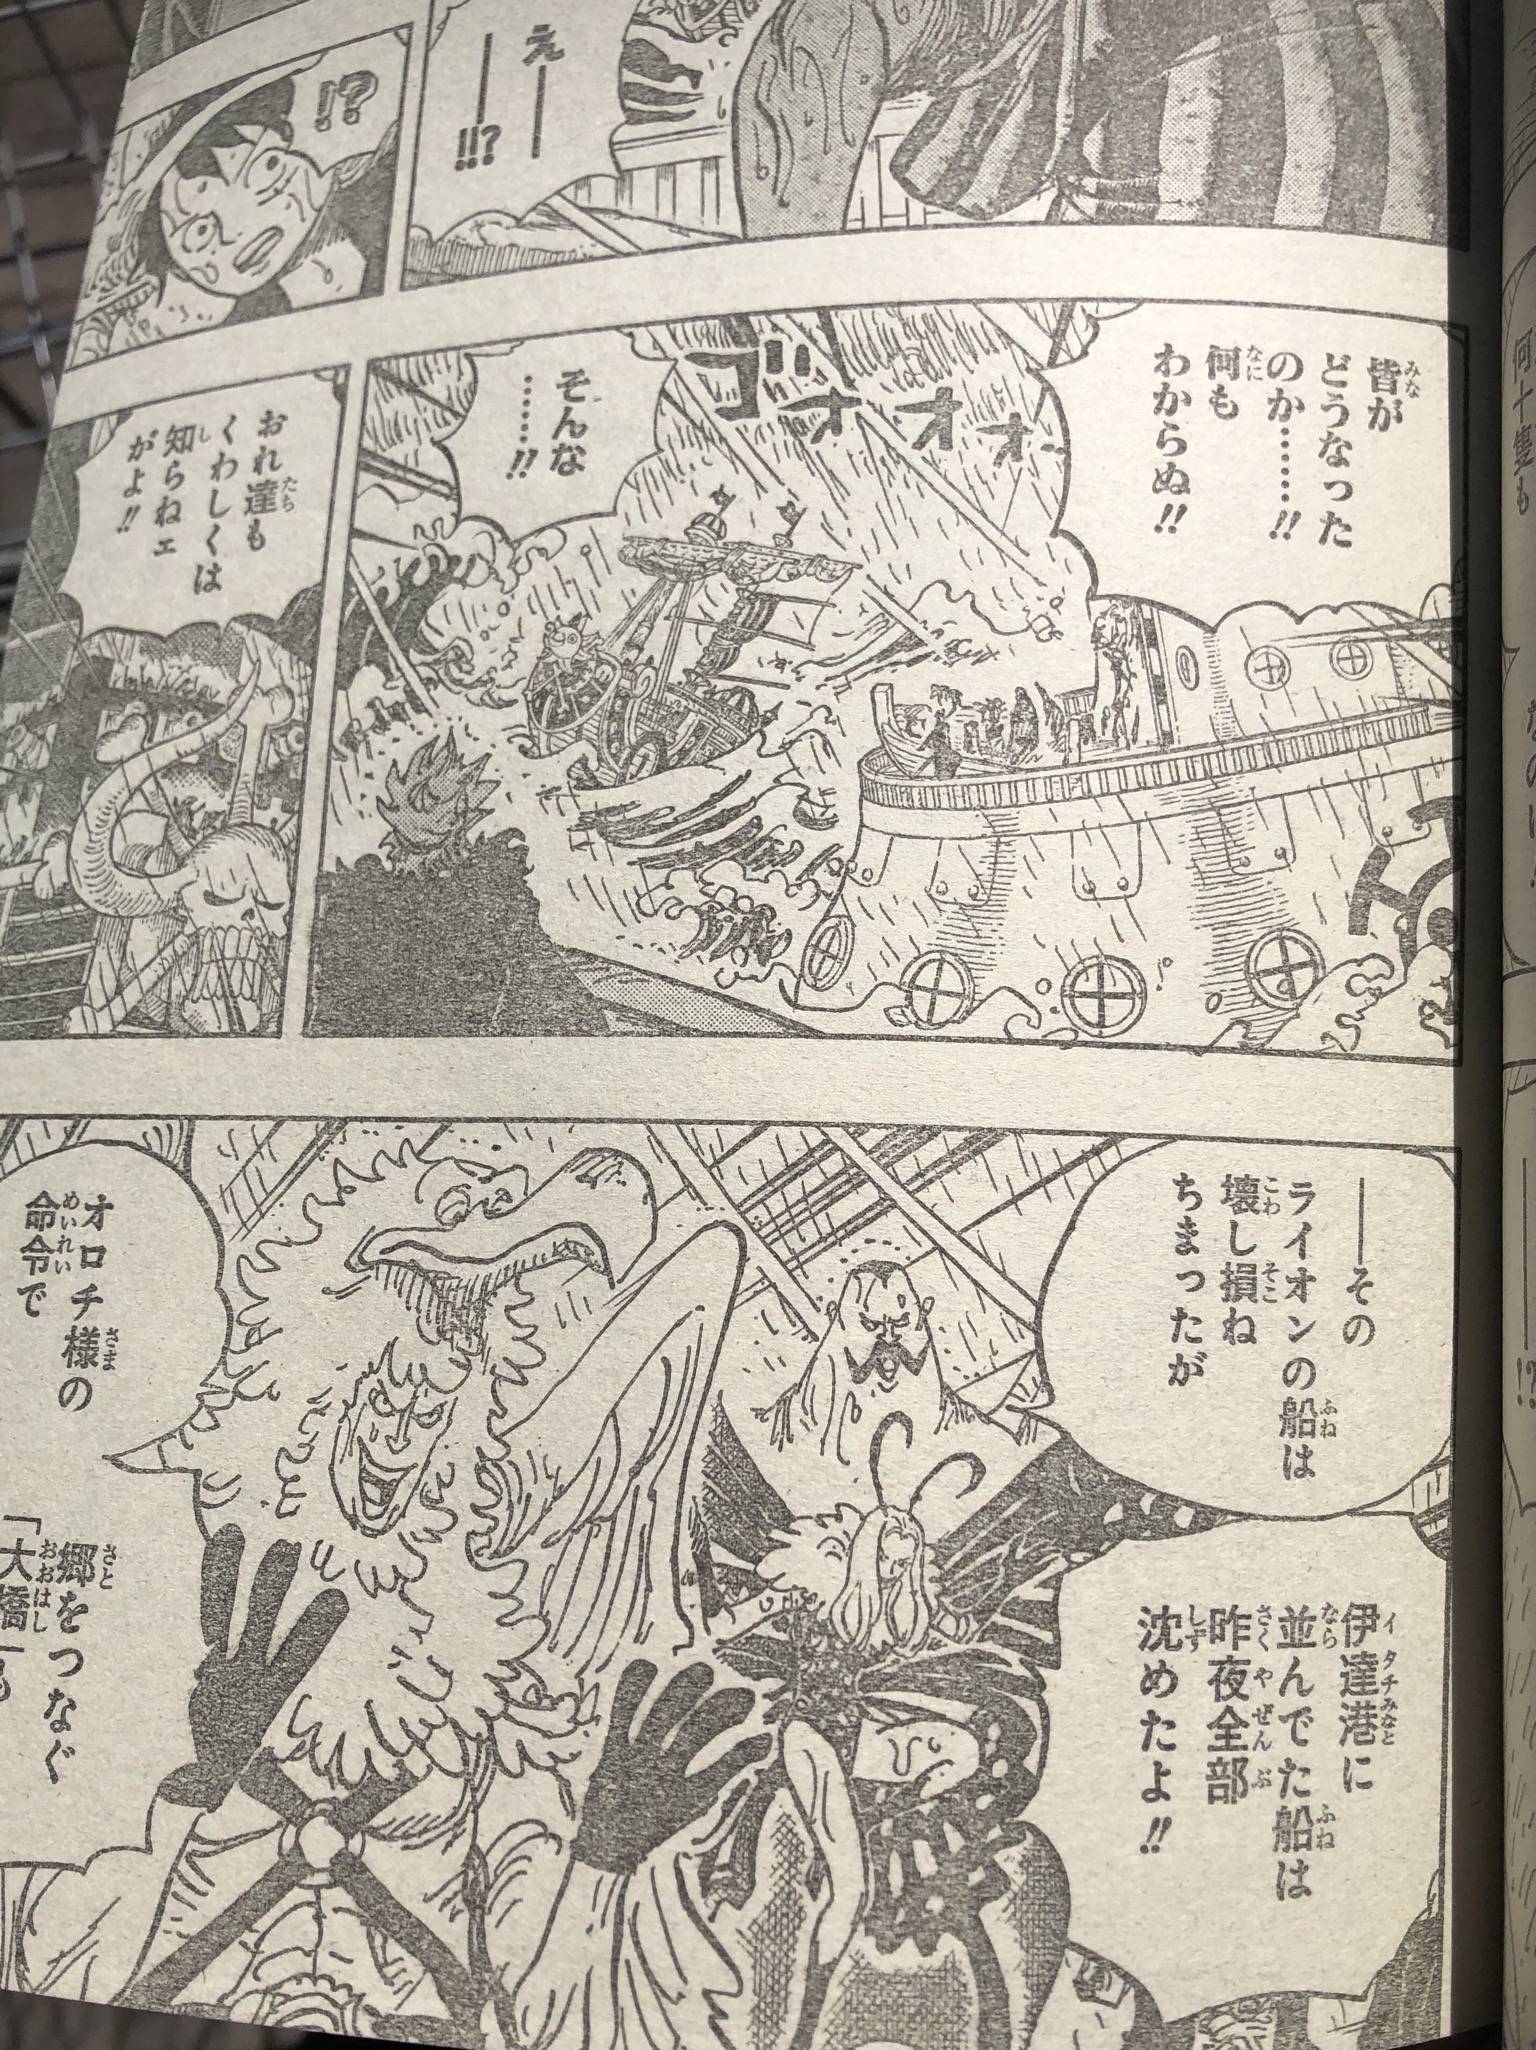 Spoiler One Piece Chapter 975 Spoilers Discussion Page 160 Worstgen